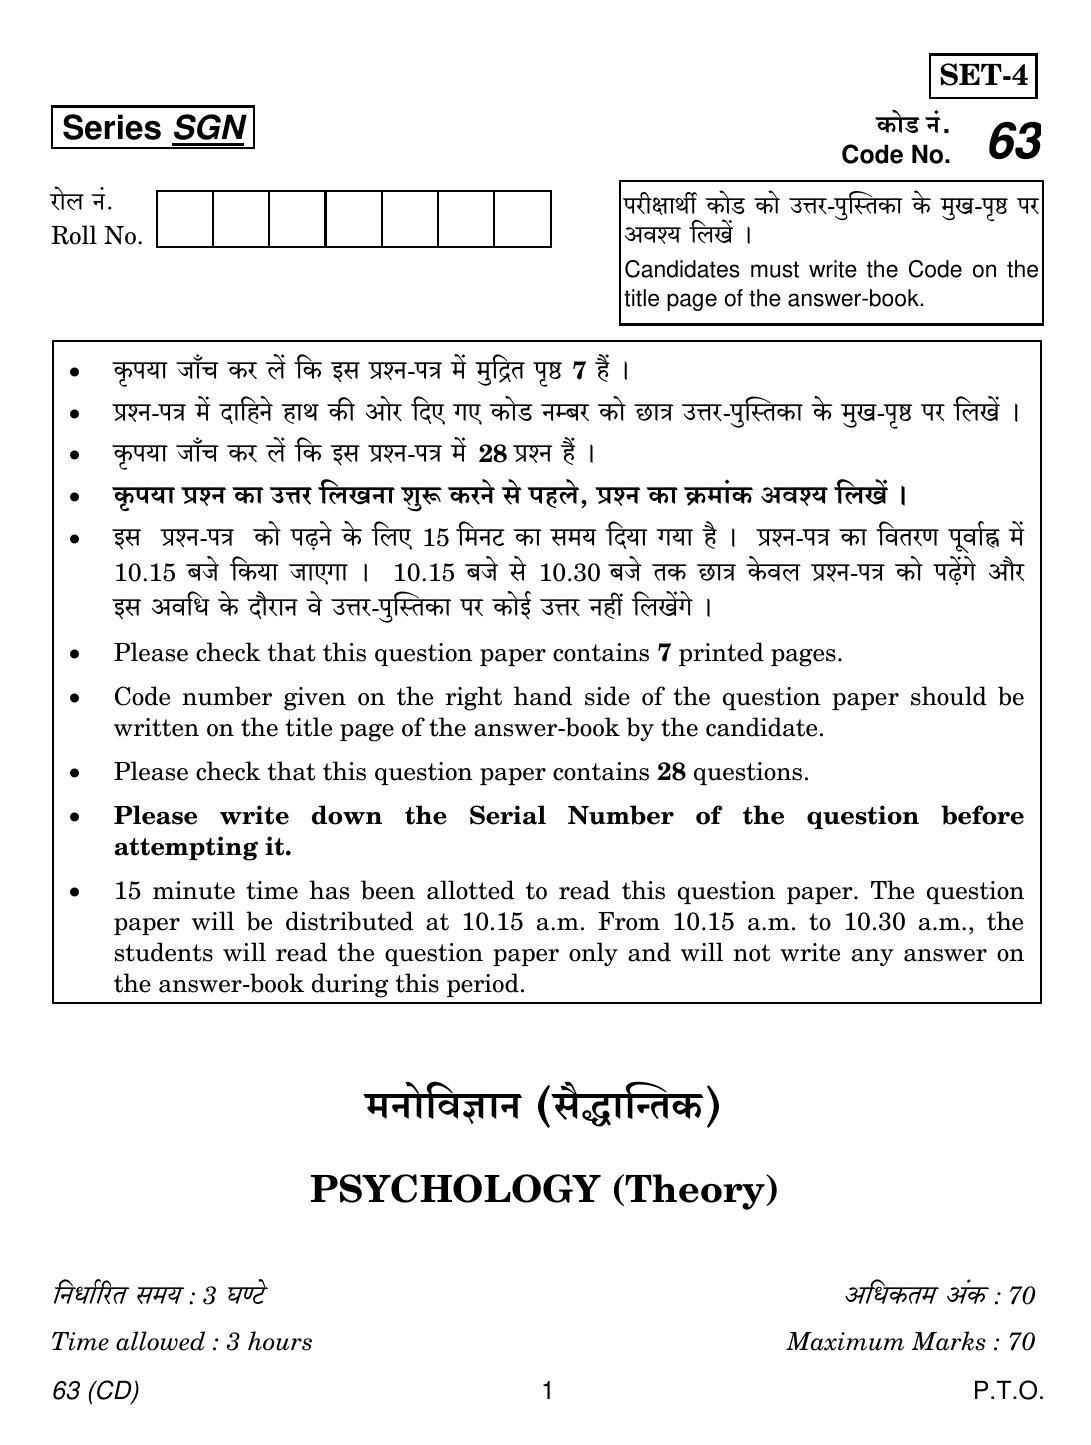 CBSE Class 12 63 PSYCHOLOGY CD 2018 Question Paper - Page 1